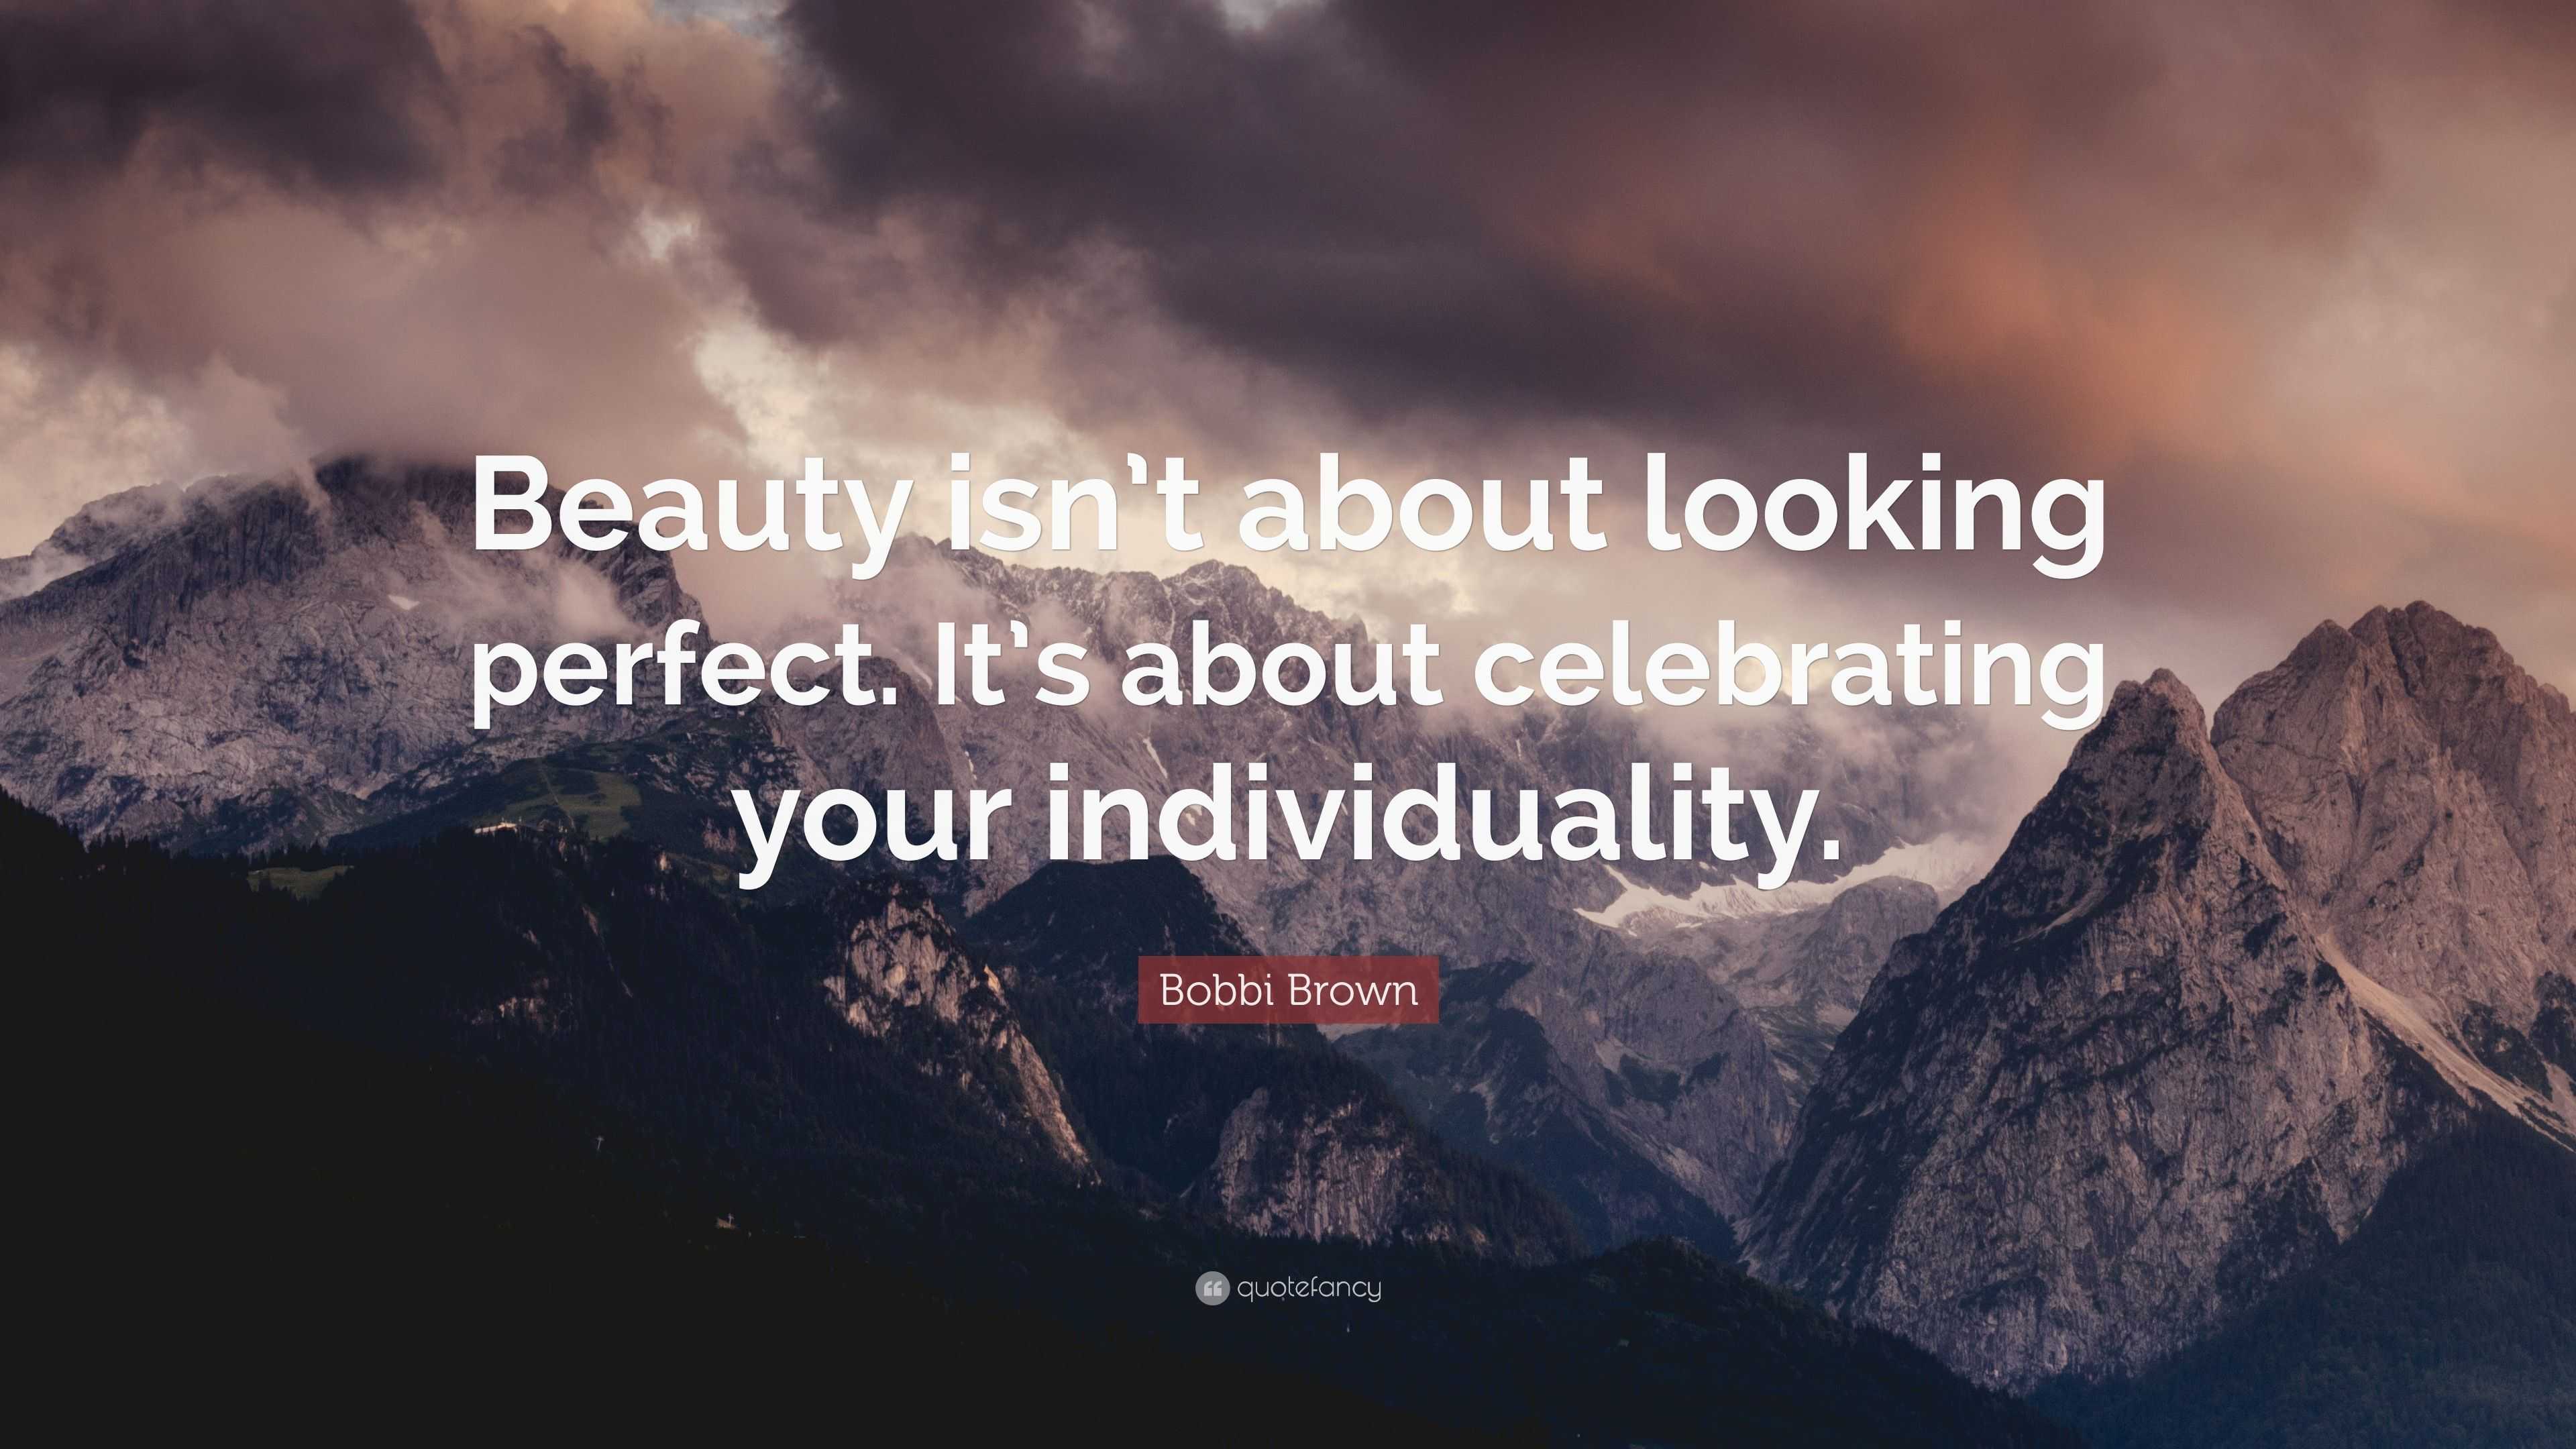 Bobbi Brown Quote: “Beauty isn't about looking perfect. It's about